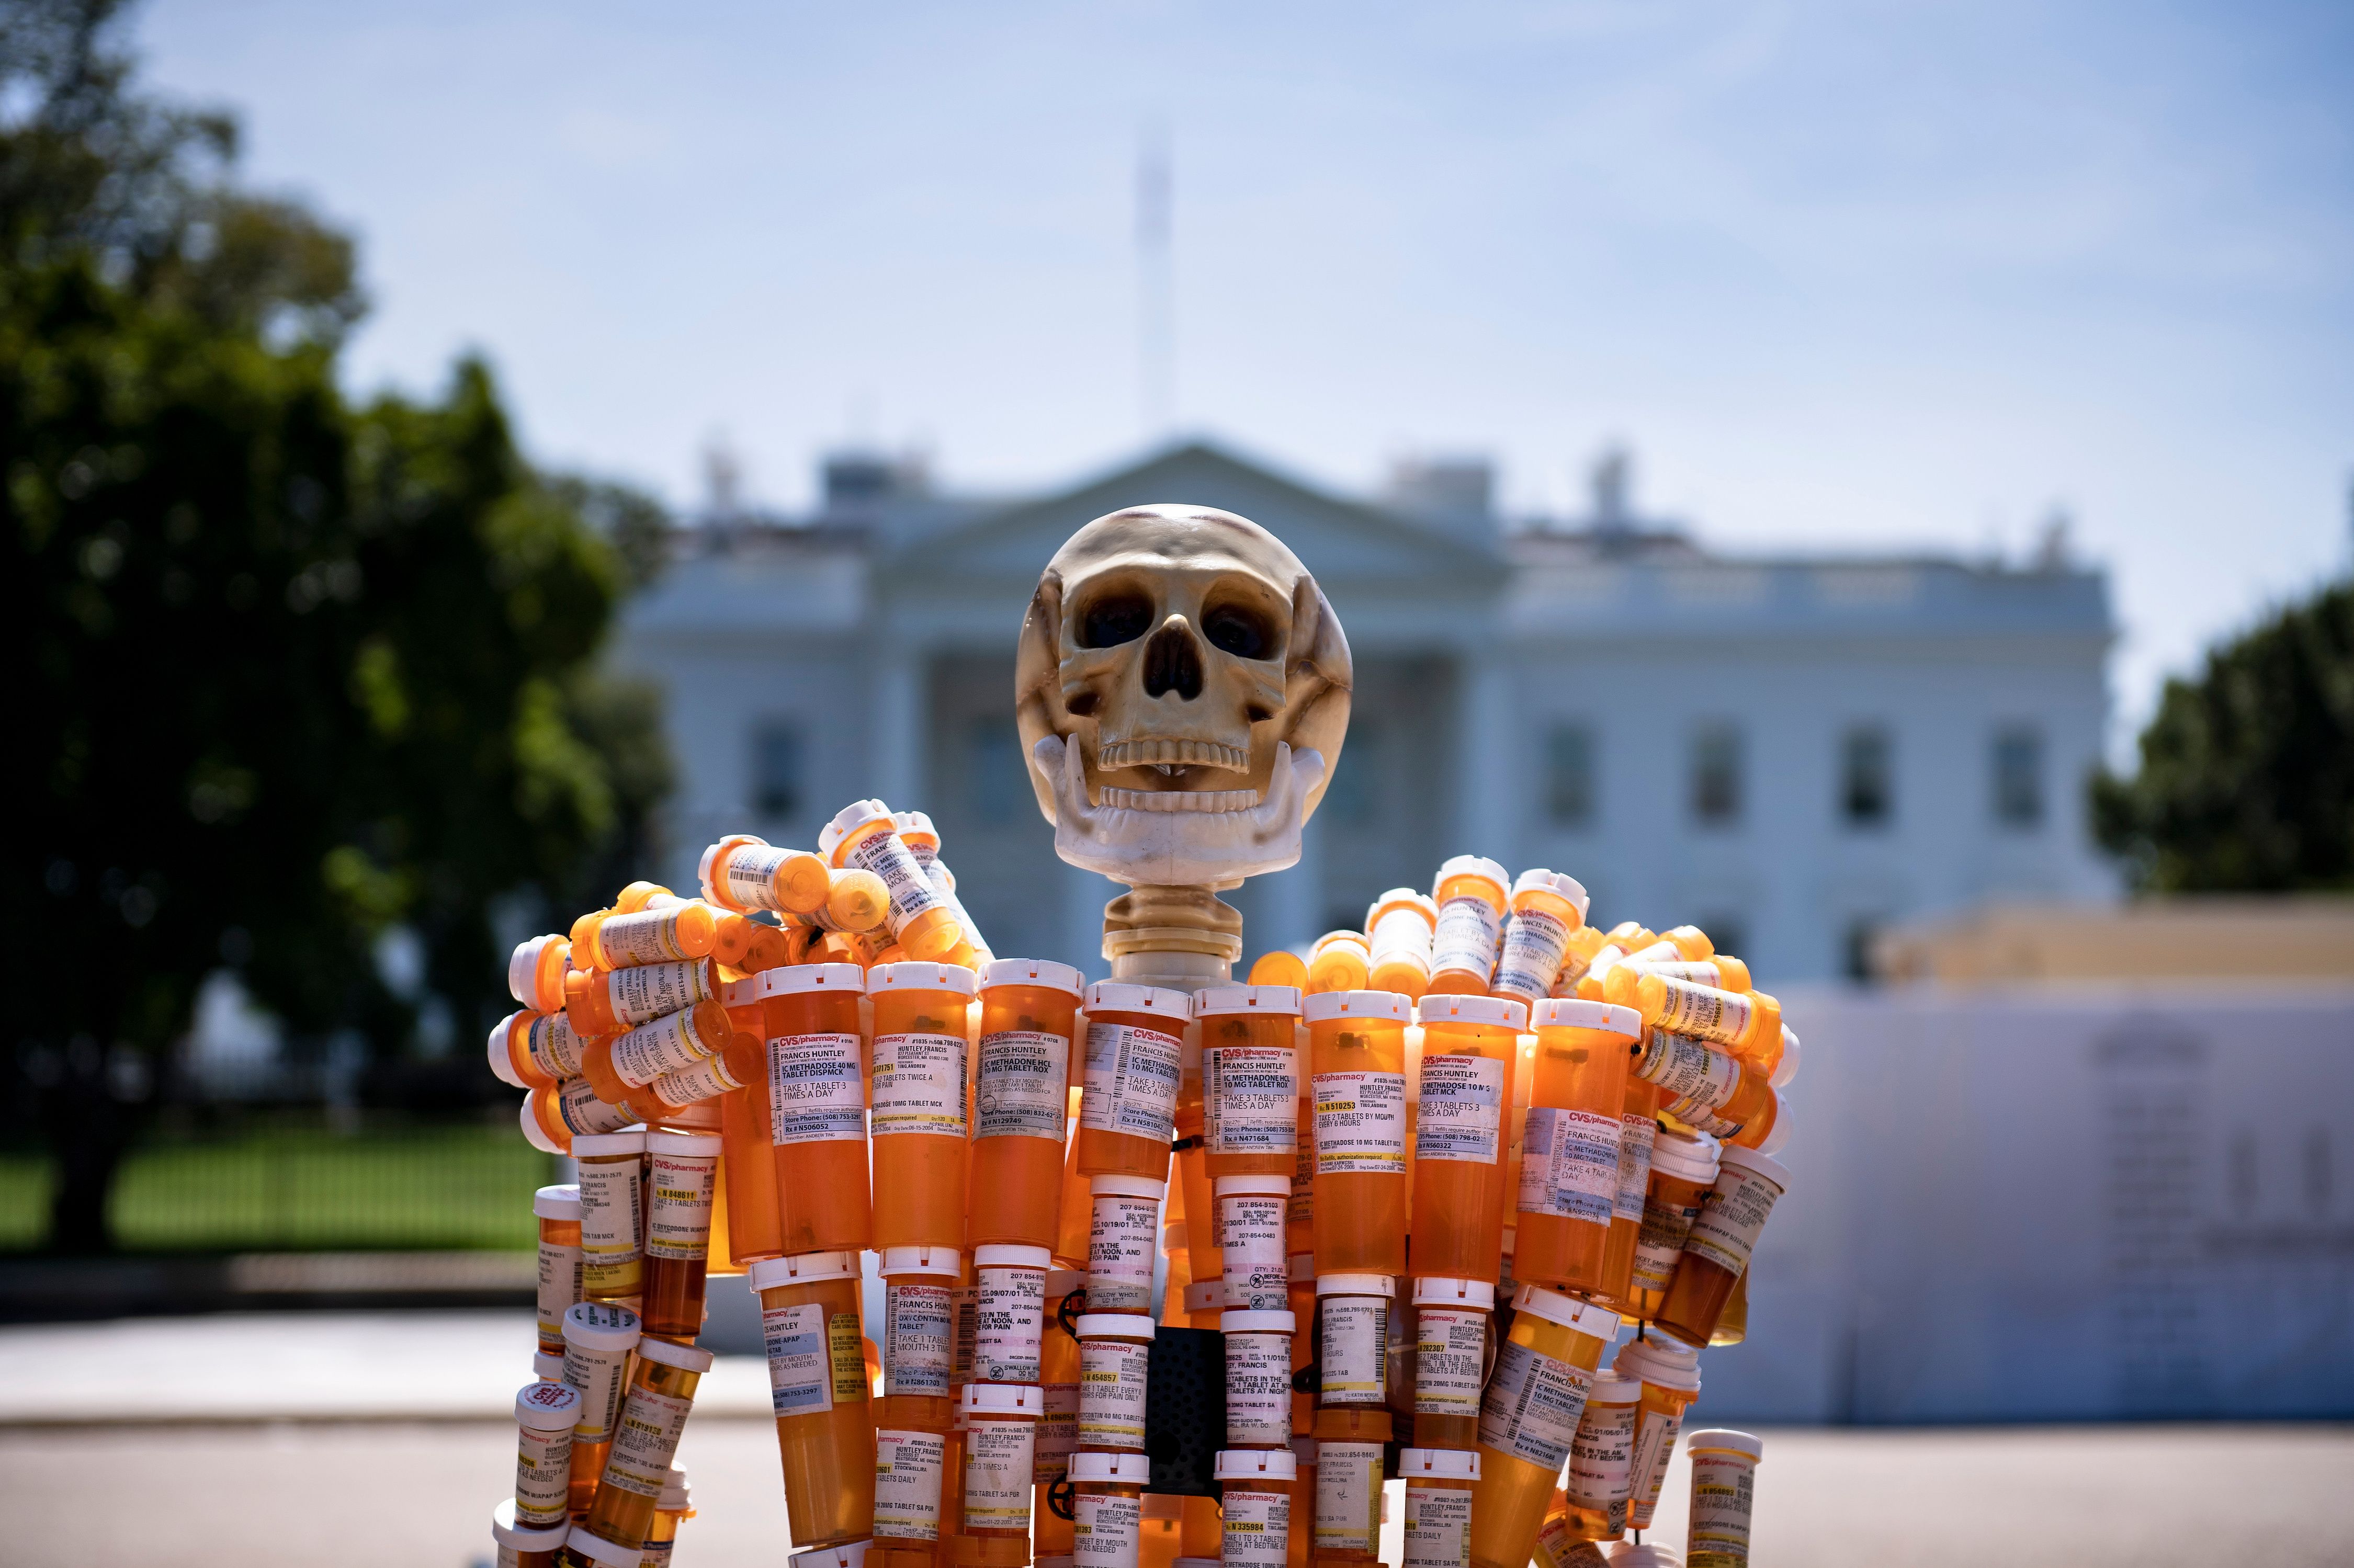 A skeleton made out of OxyContin bottles, displayed at a protest in front of the White House